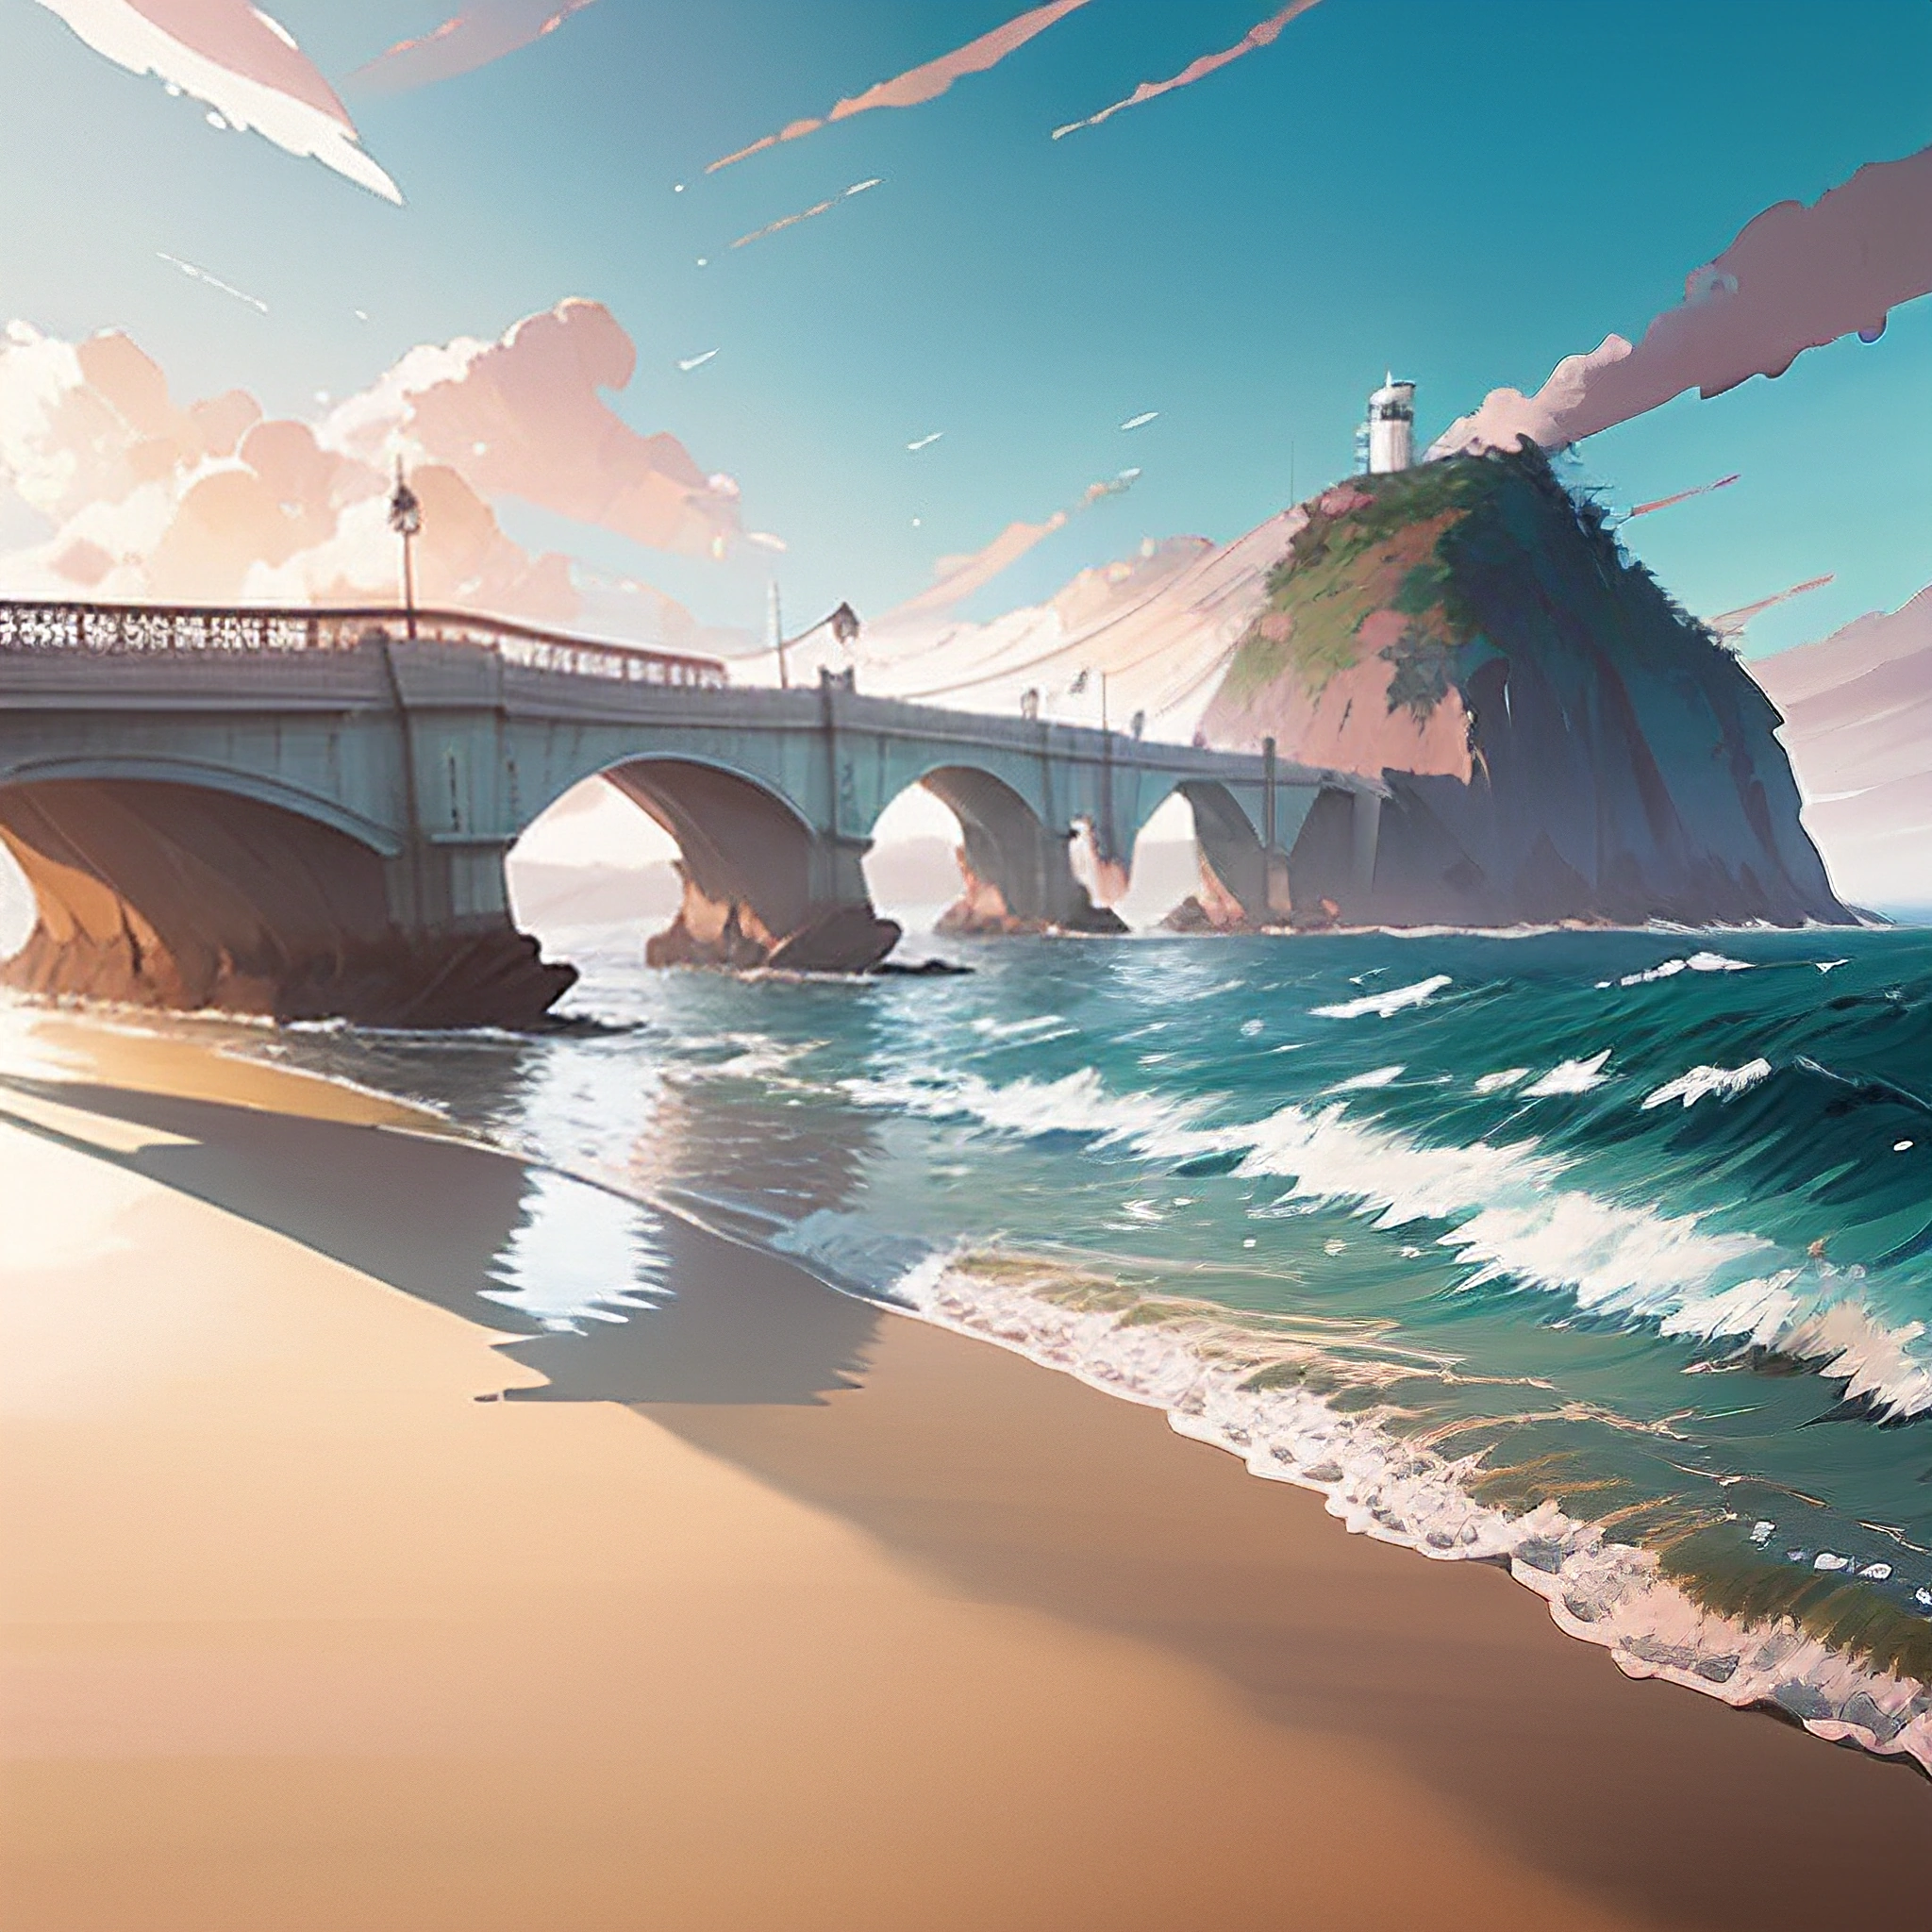 a painting of a bridge over a beach with waves